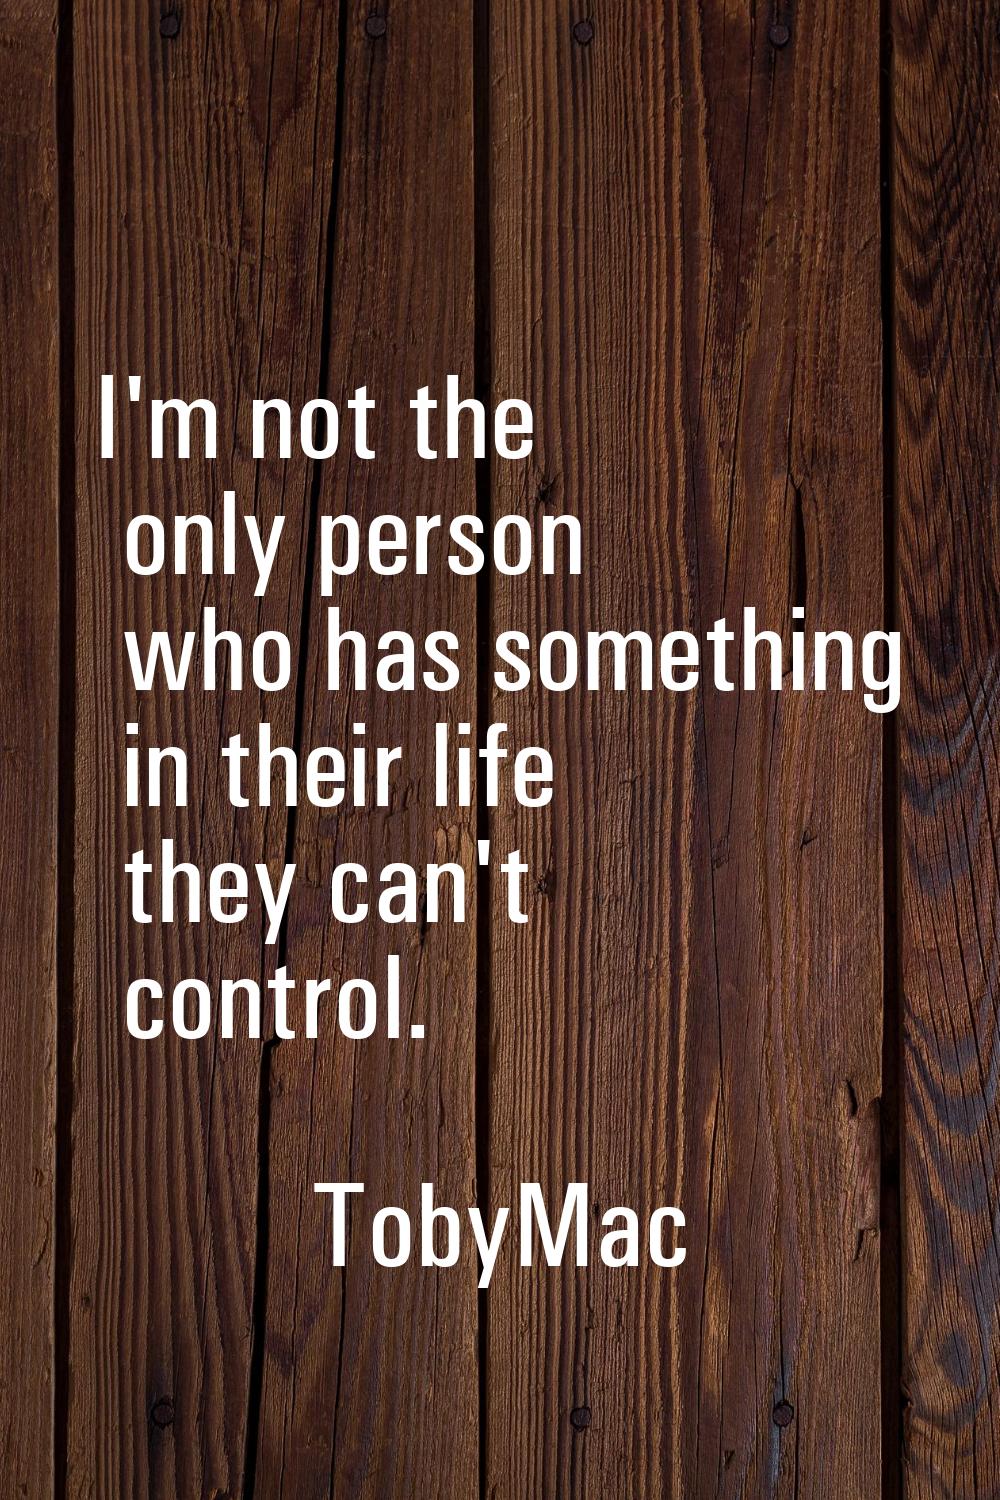 I'm not the only person who has something in their life they can't control.